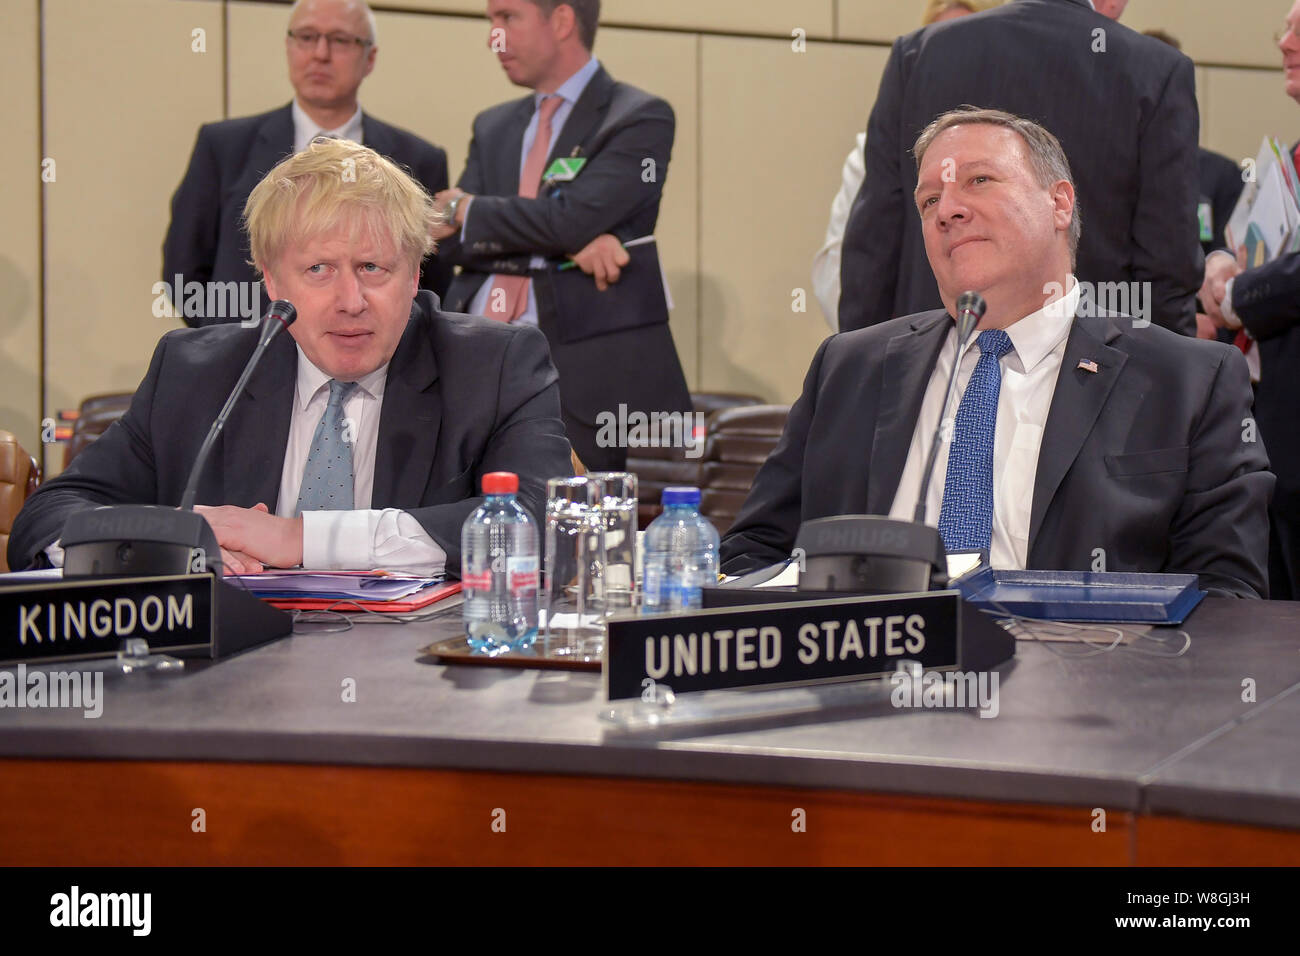 U.S. Secretary of State Mike Pompeo and UK Foreign Secretary Boris Johnson listen during a meeting of NATO Foreign Ministers in Brussels, Belgium, on Stock Photo